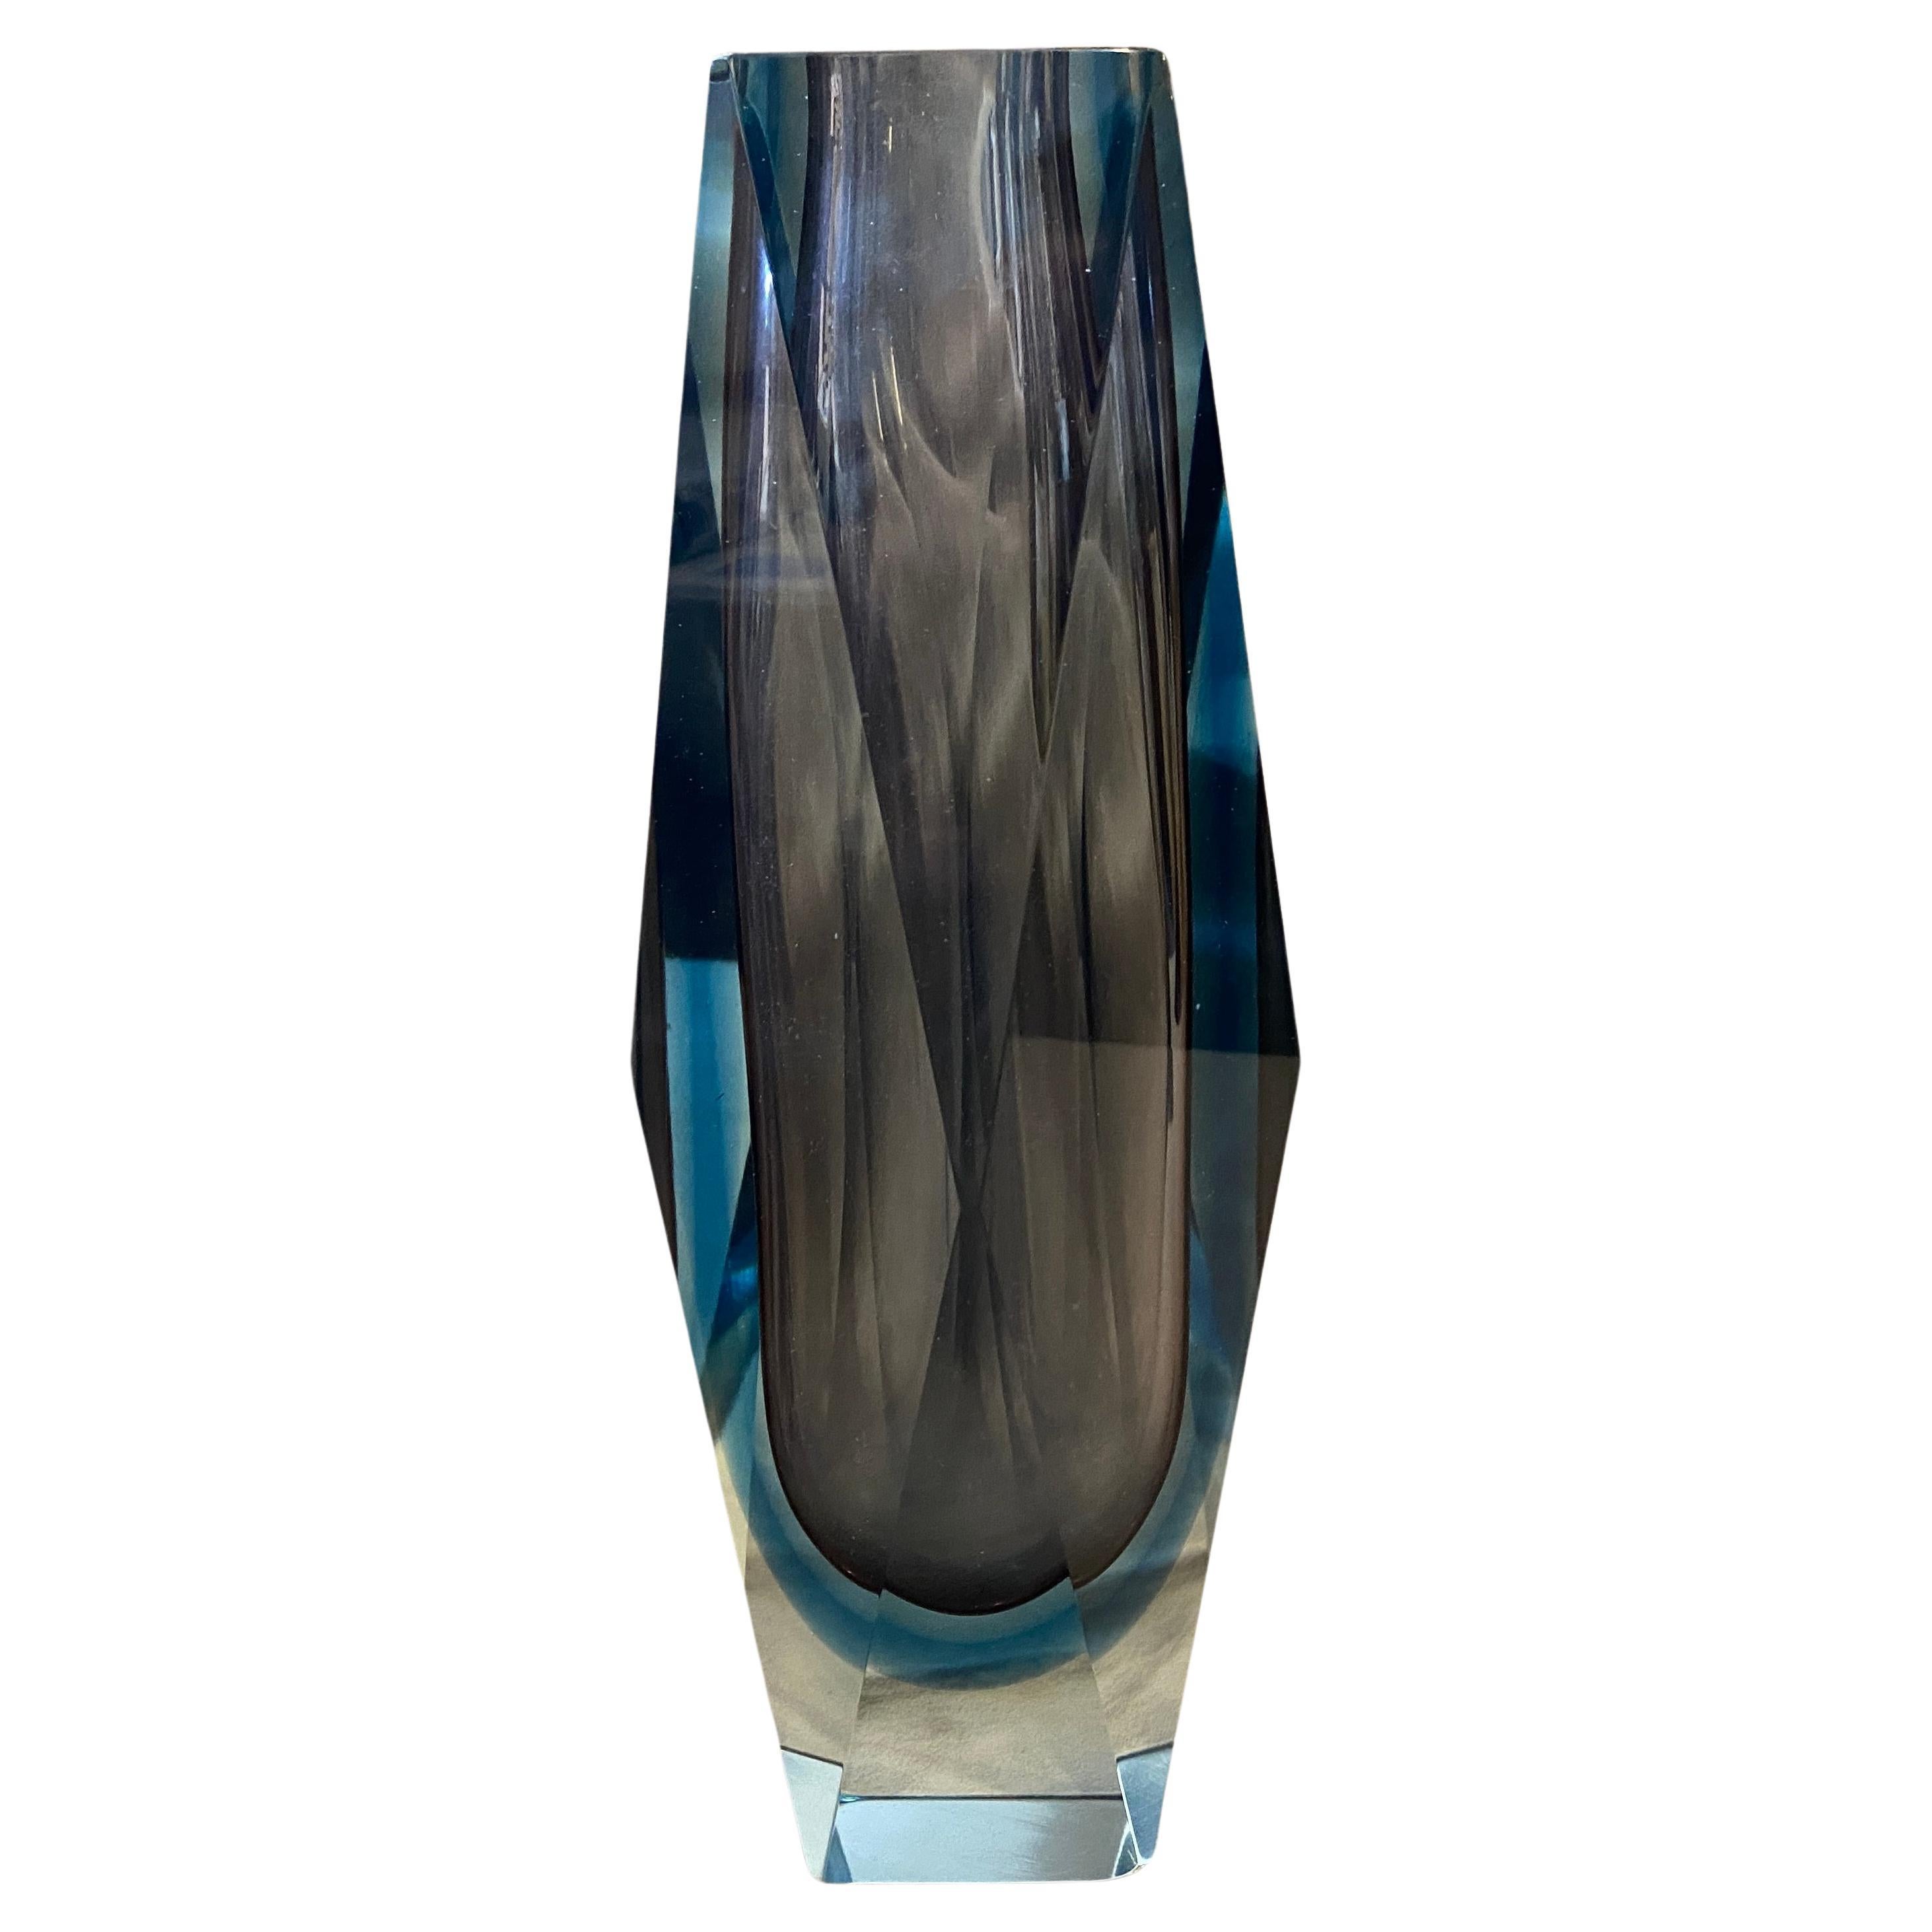 1970s Modernist Purple and Blue Faceted Murano Glass Vase by Seguso